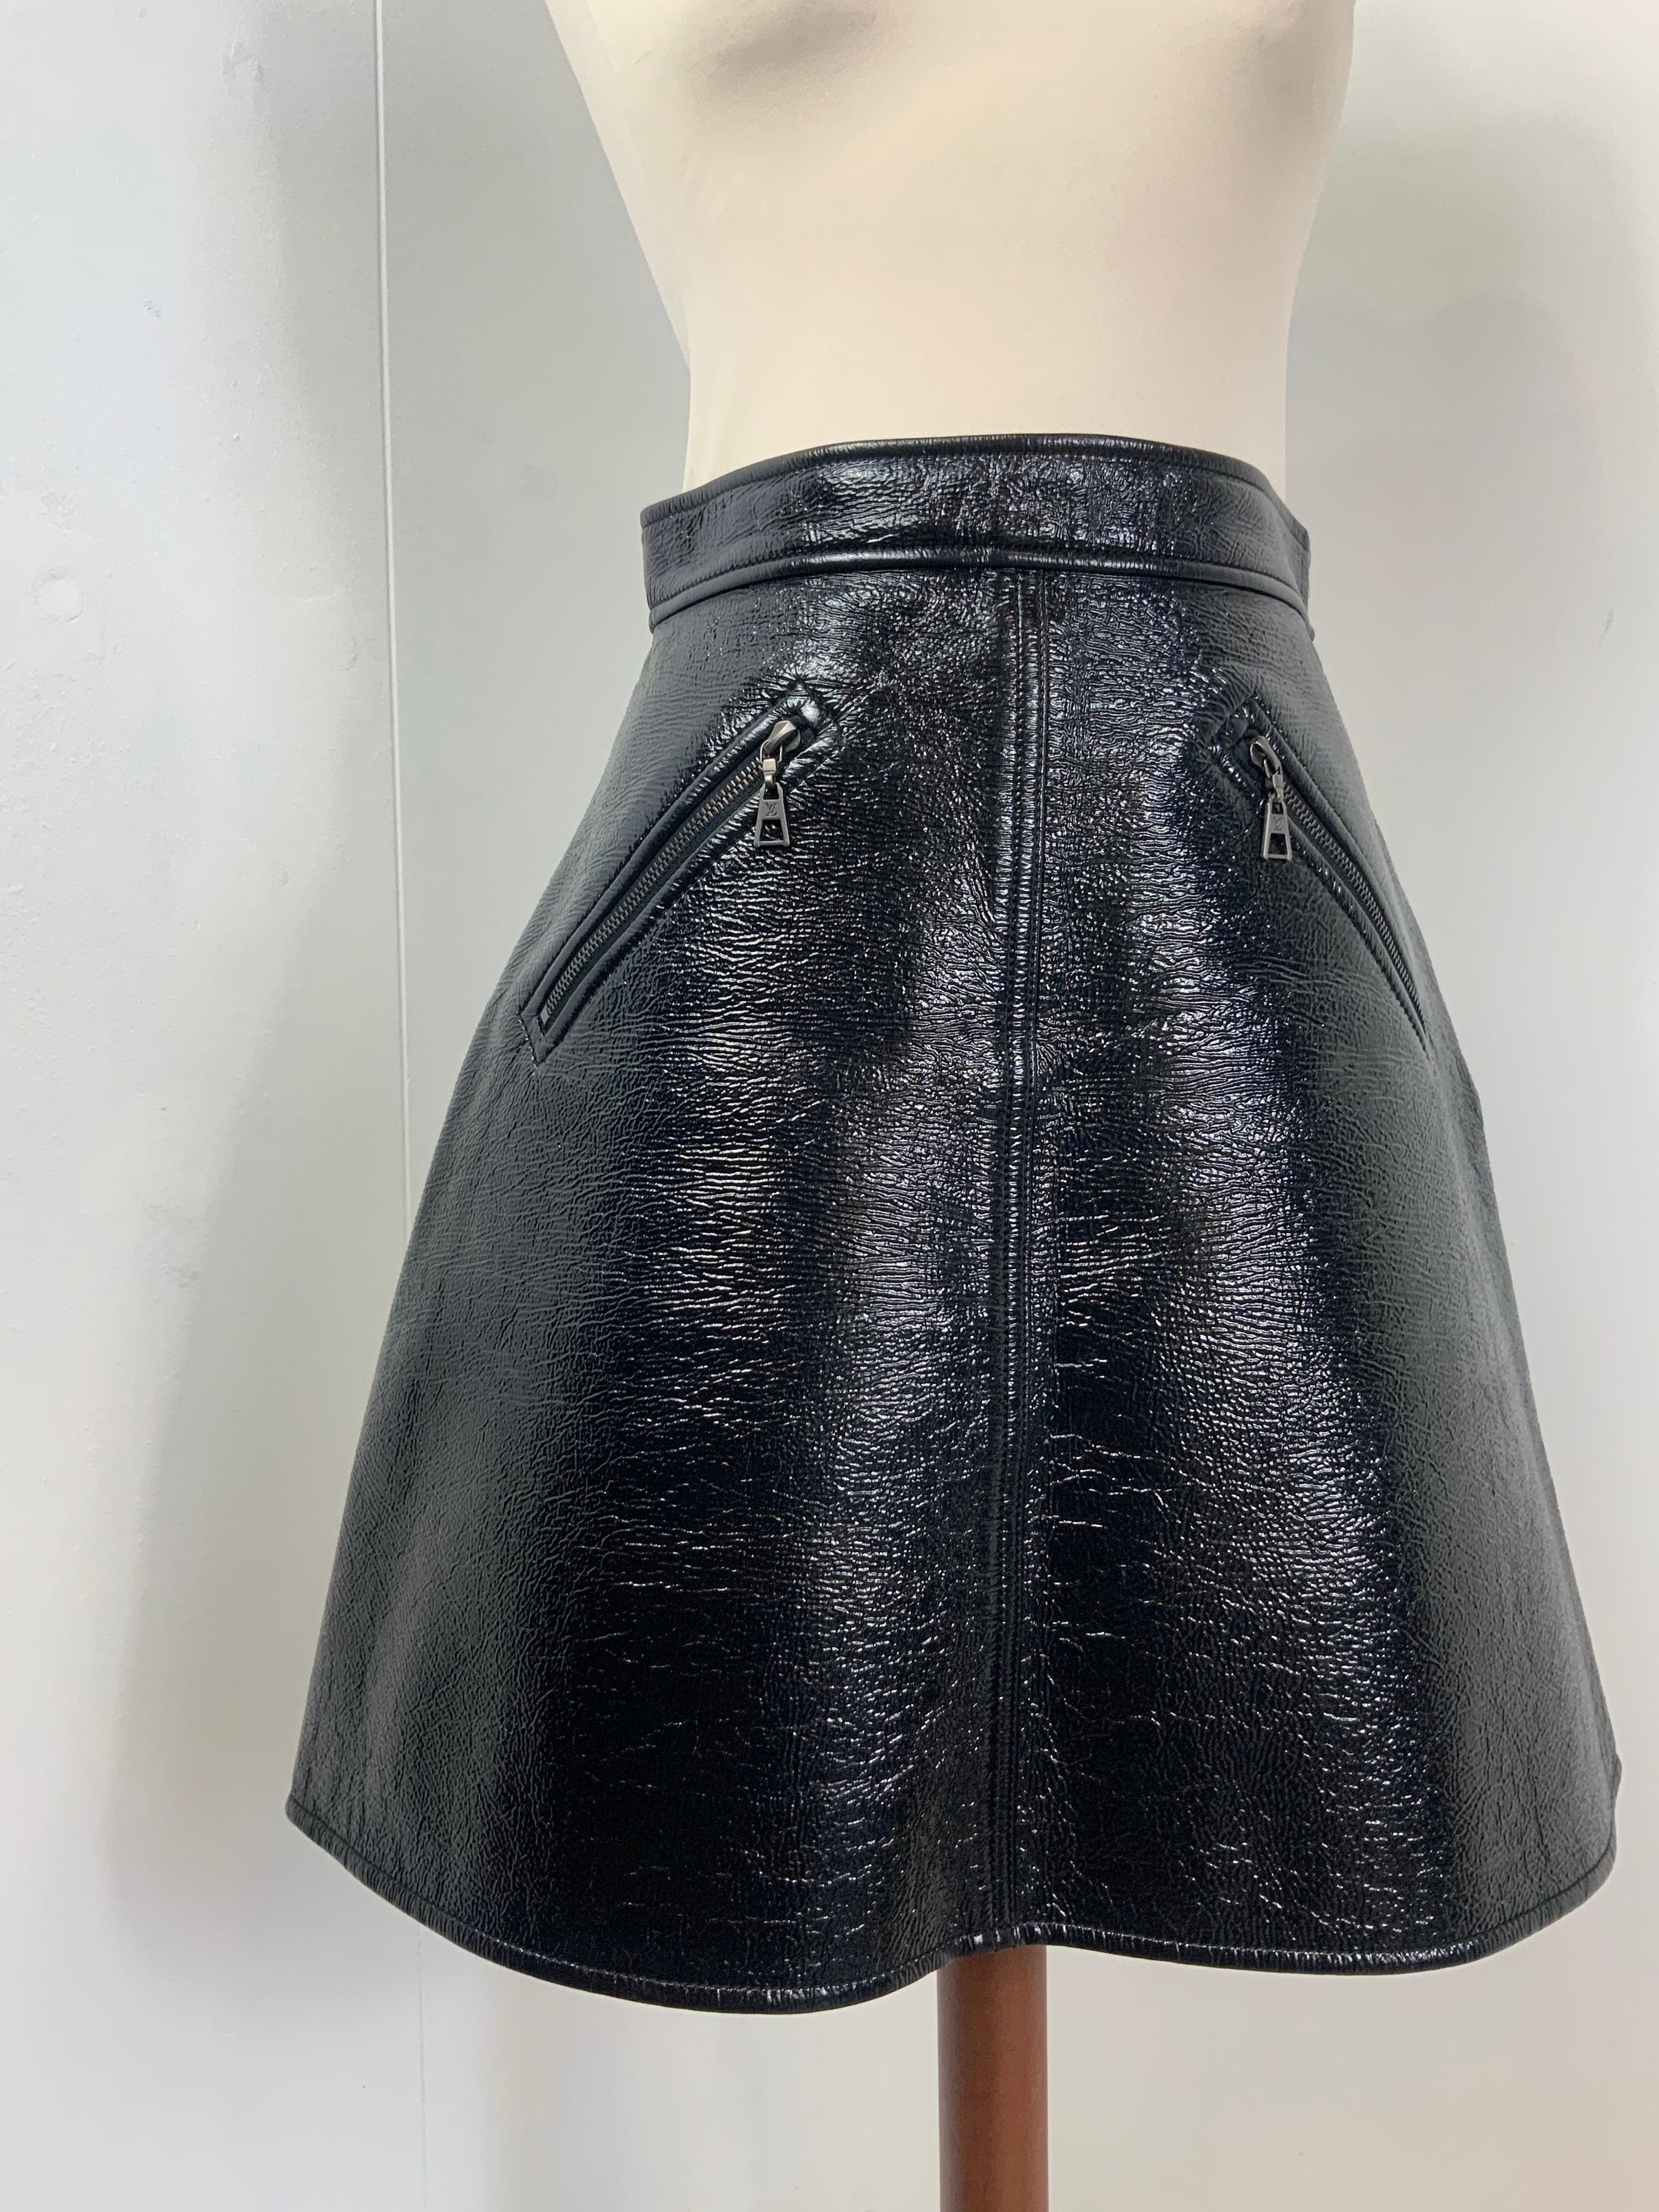 Louis Vuitton skirt.
A line. In cotton, vinyl effect.
Lining in polyamide and elastane.
Featuring lateral zip closure and two front pockets.
Size 38 FR that fit a 42 Italian. 
Measurements 
Waist 36 cm
Length 50 cm
Conditions Excellent - Previously